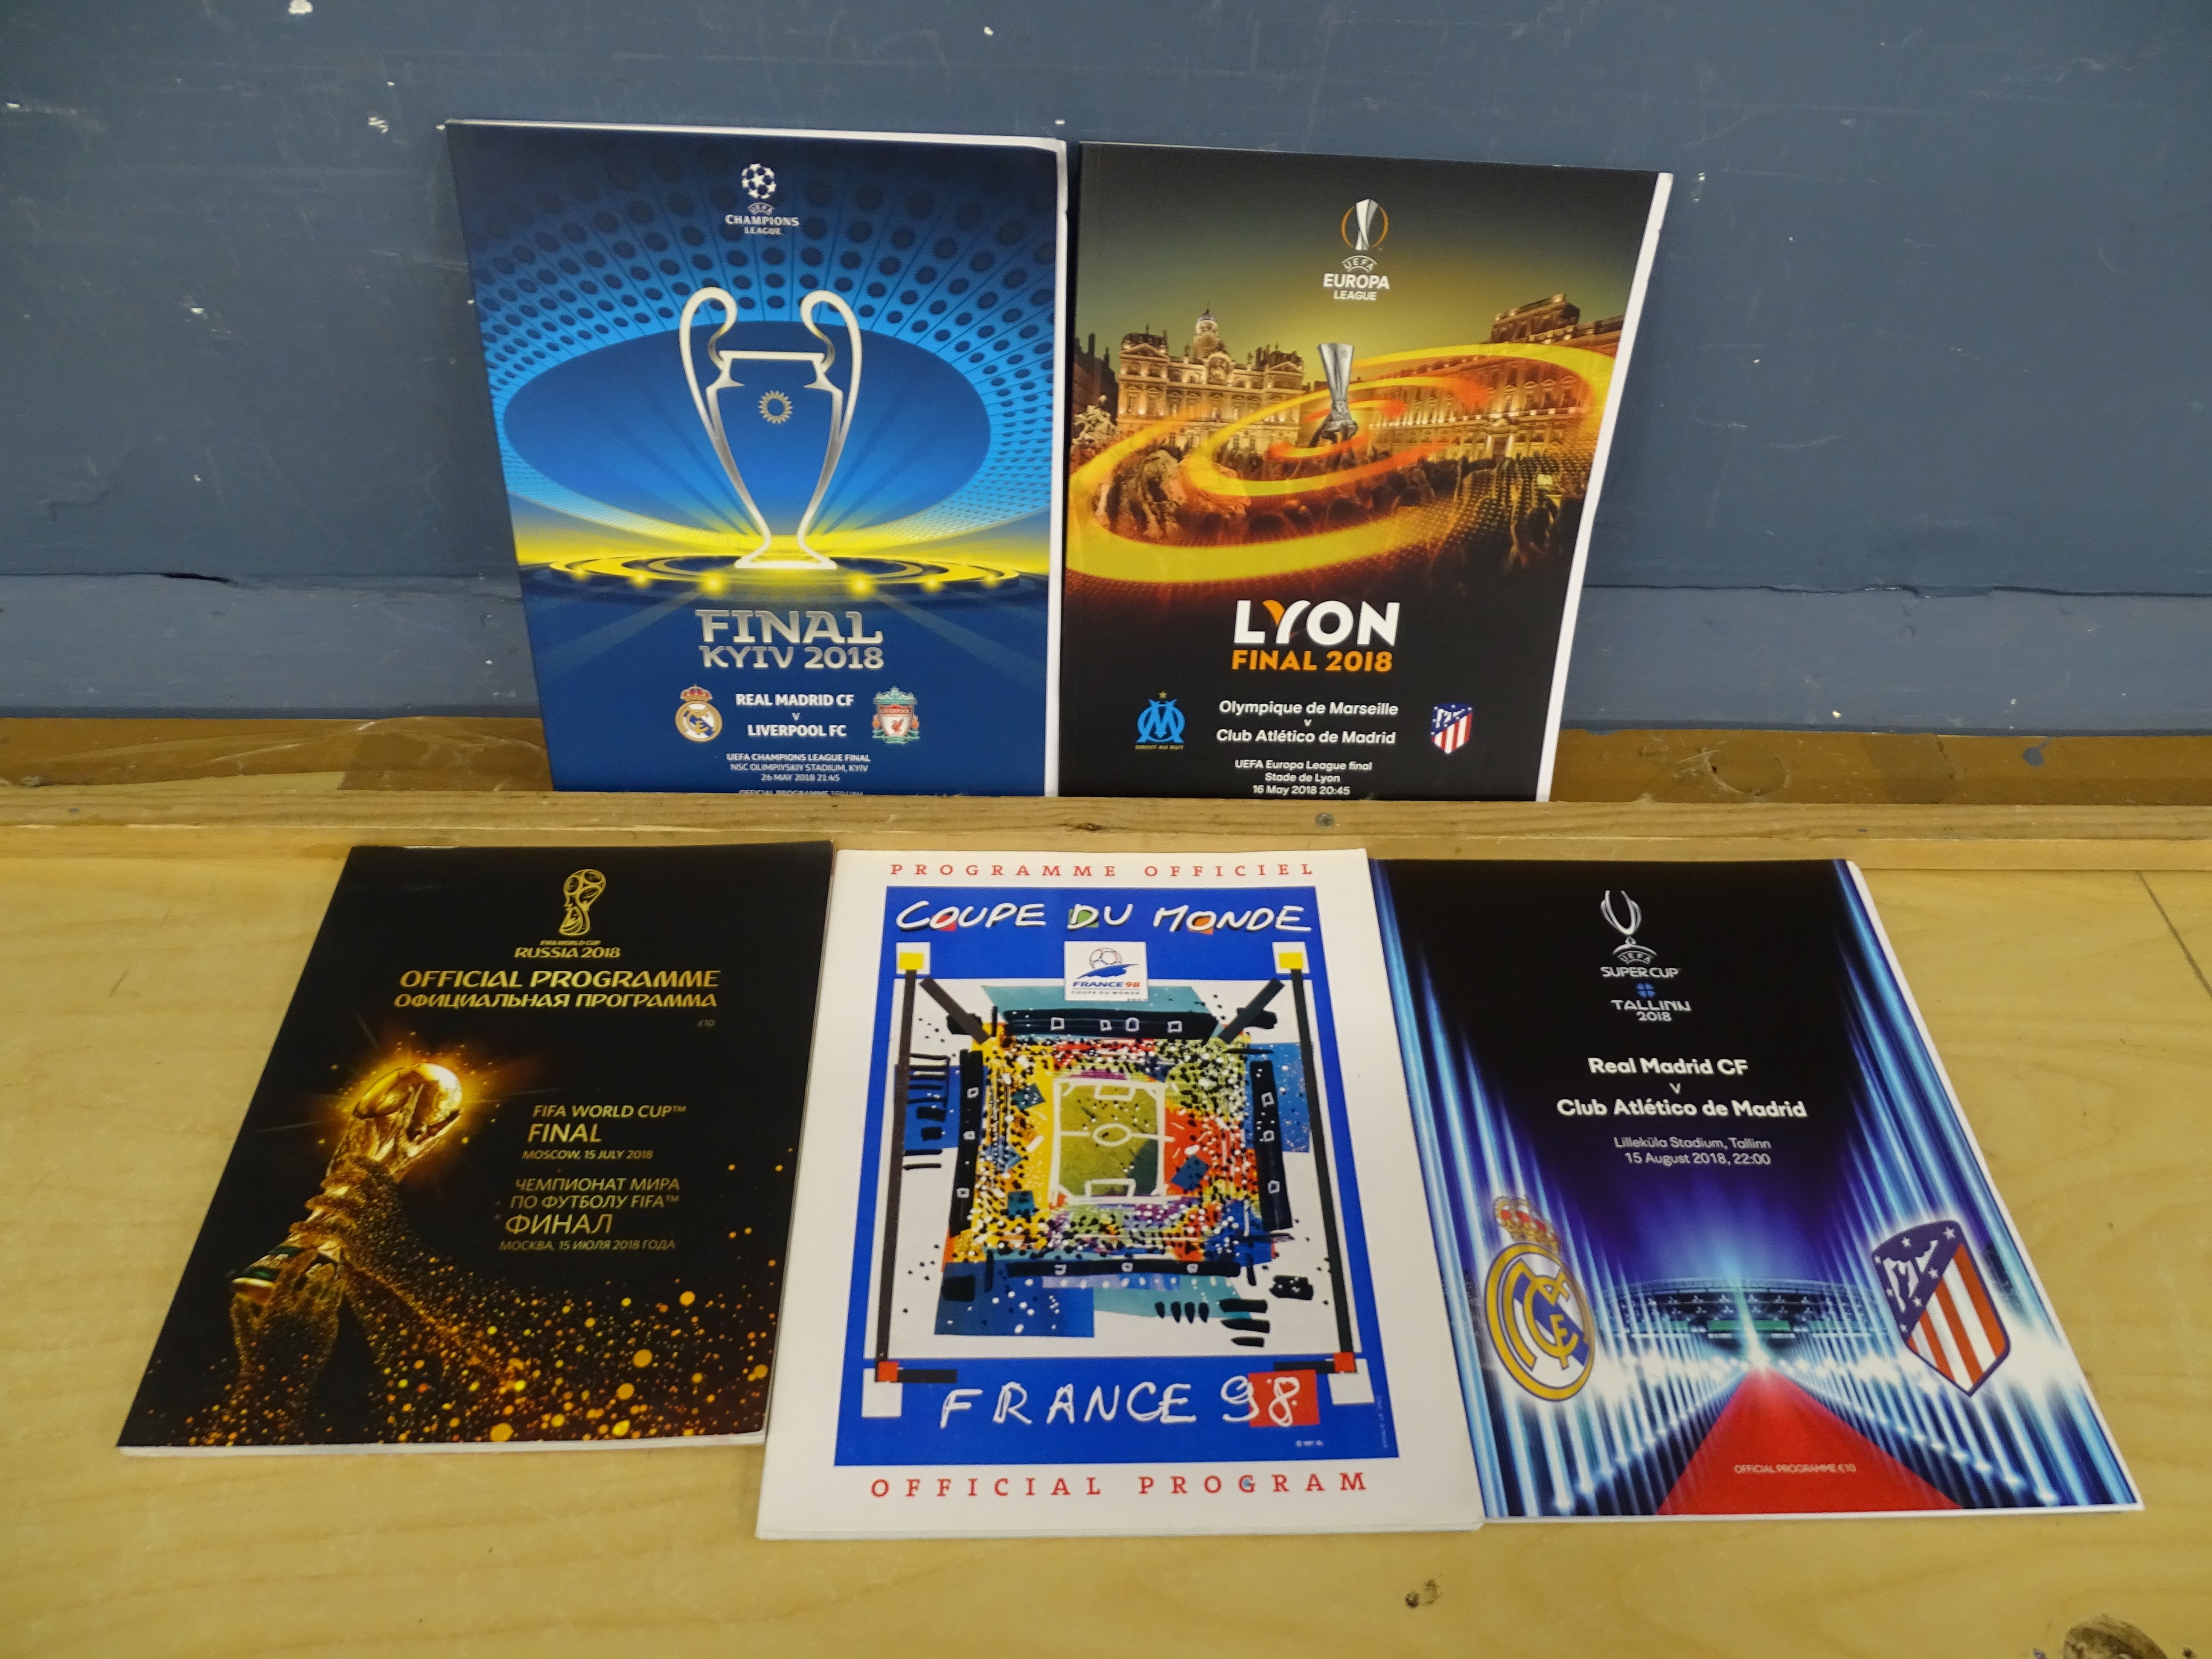 5 Football programs to include World Cup France 98 and UEFA Champions League final etc